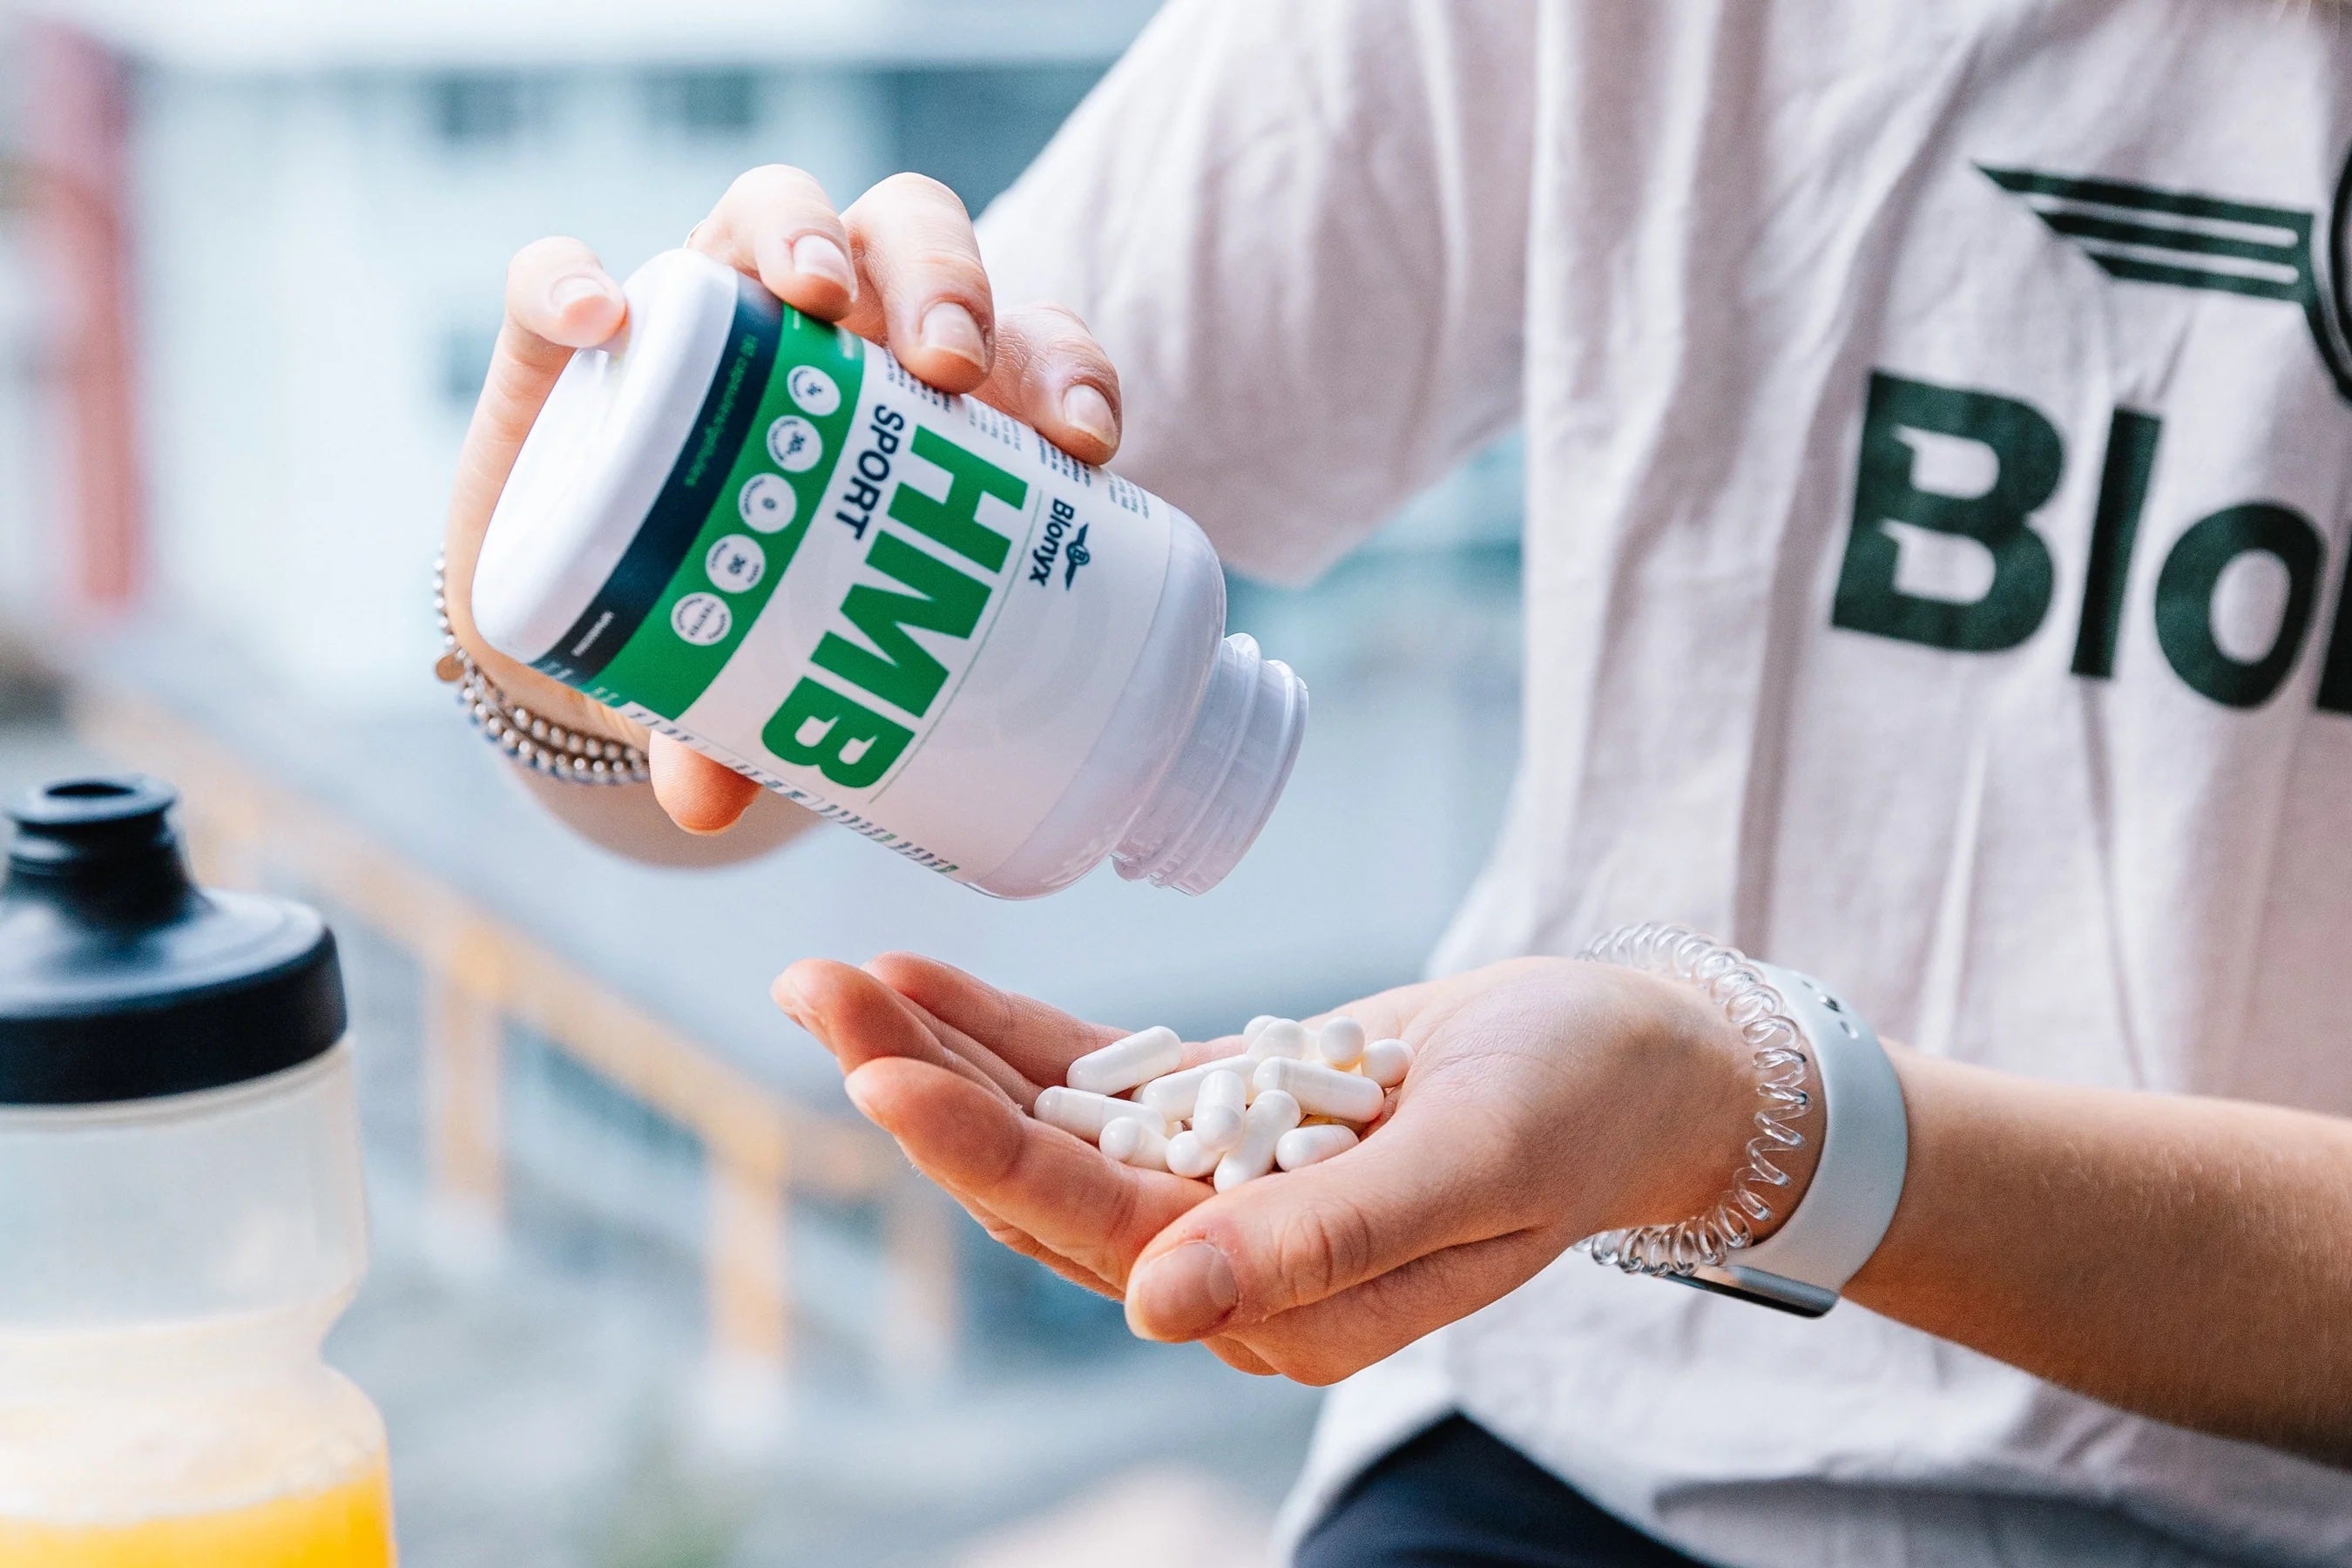 5 Easy Ways to Make Taking Your Supplements a Daily Habit